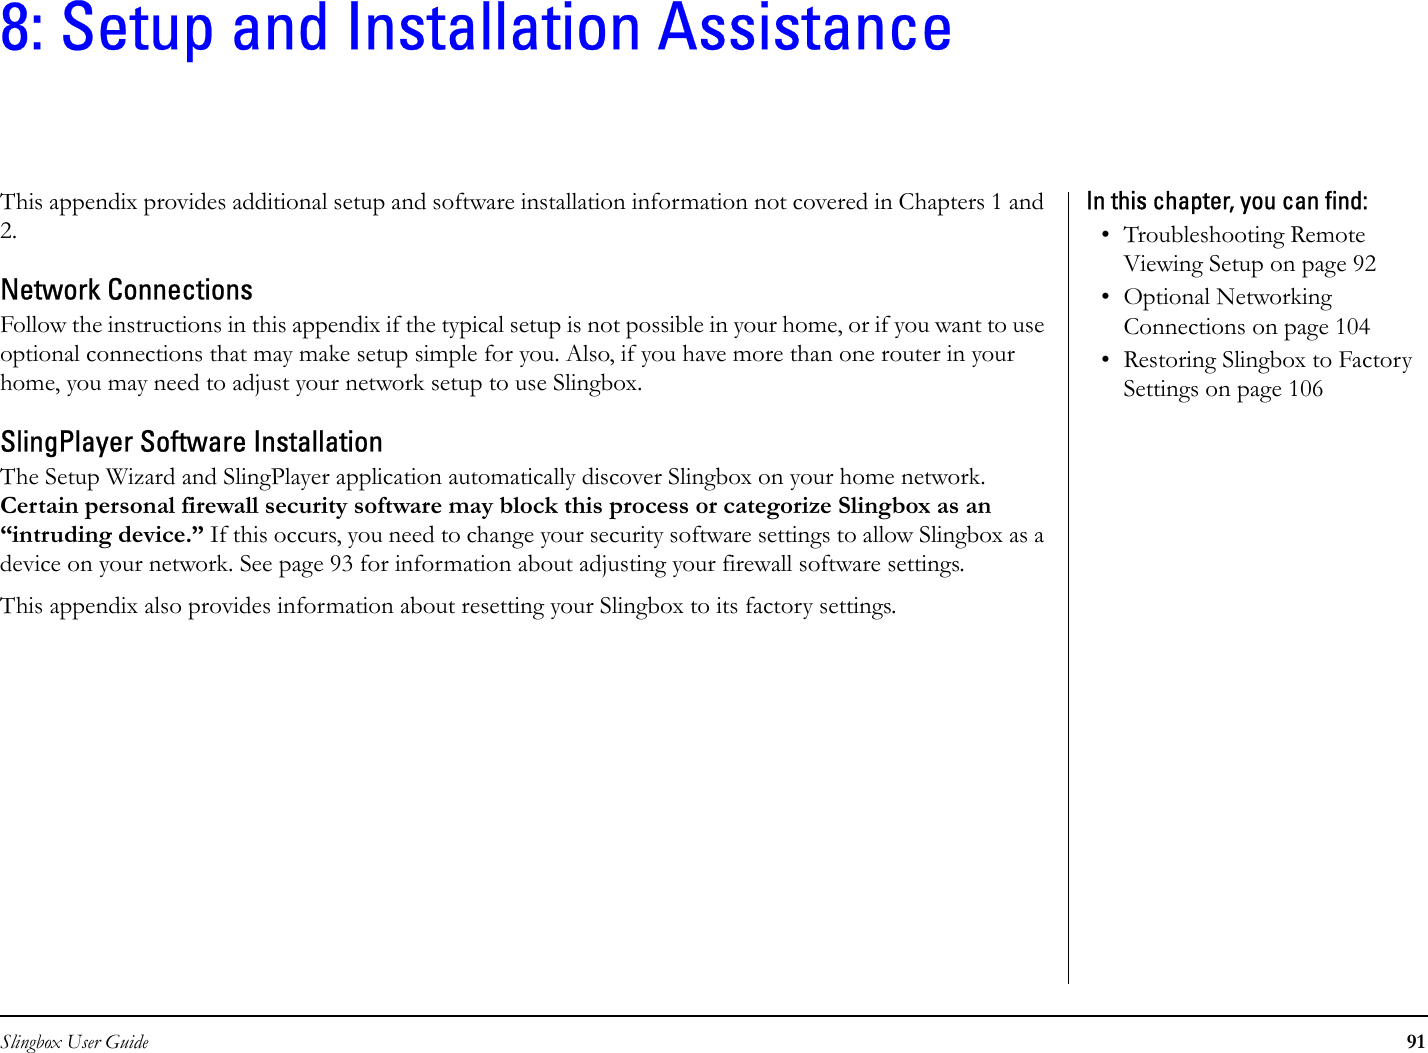 Slingbox User Guide 918: Setup and Installation AssistanceThis appendix provides additional setup and software installation information not covered in Chapters 1 and 2.Network ConnectionsFollow the instructions in this appendix if the typical setup is not possible in your home, or if you want to use optional connections that may make setup simple for you. Also, if you have more than one router in your home, you may need to adjust your network setup to use Slingbox.SlingPlayer Software InstallationThe Setup Wizard and SlingPlayer application automatically discover Slingbox on your home network. Certain personal firewall security software may block this process or categorize Slingbox as an “intruding device.” If this occurs, you need to change your security software settings to allow Slingbox as a device on your network. See page 93 for information about adjusting your firewall software settings.This appendix also provides information about resetting your Slingbox to its factory settings.In this chapter, you can find: • Troubleshooting Remote Viewing Setup on page 92• Optional Networking Connections on page 104• Restoring Slingbox to Factory Settings on page 106